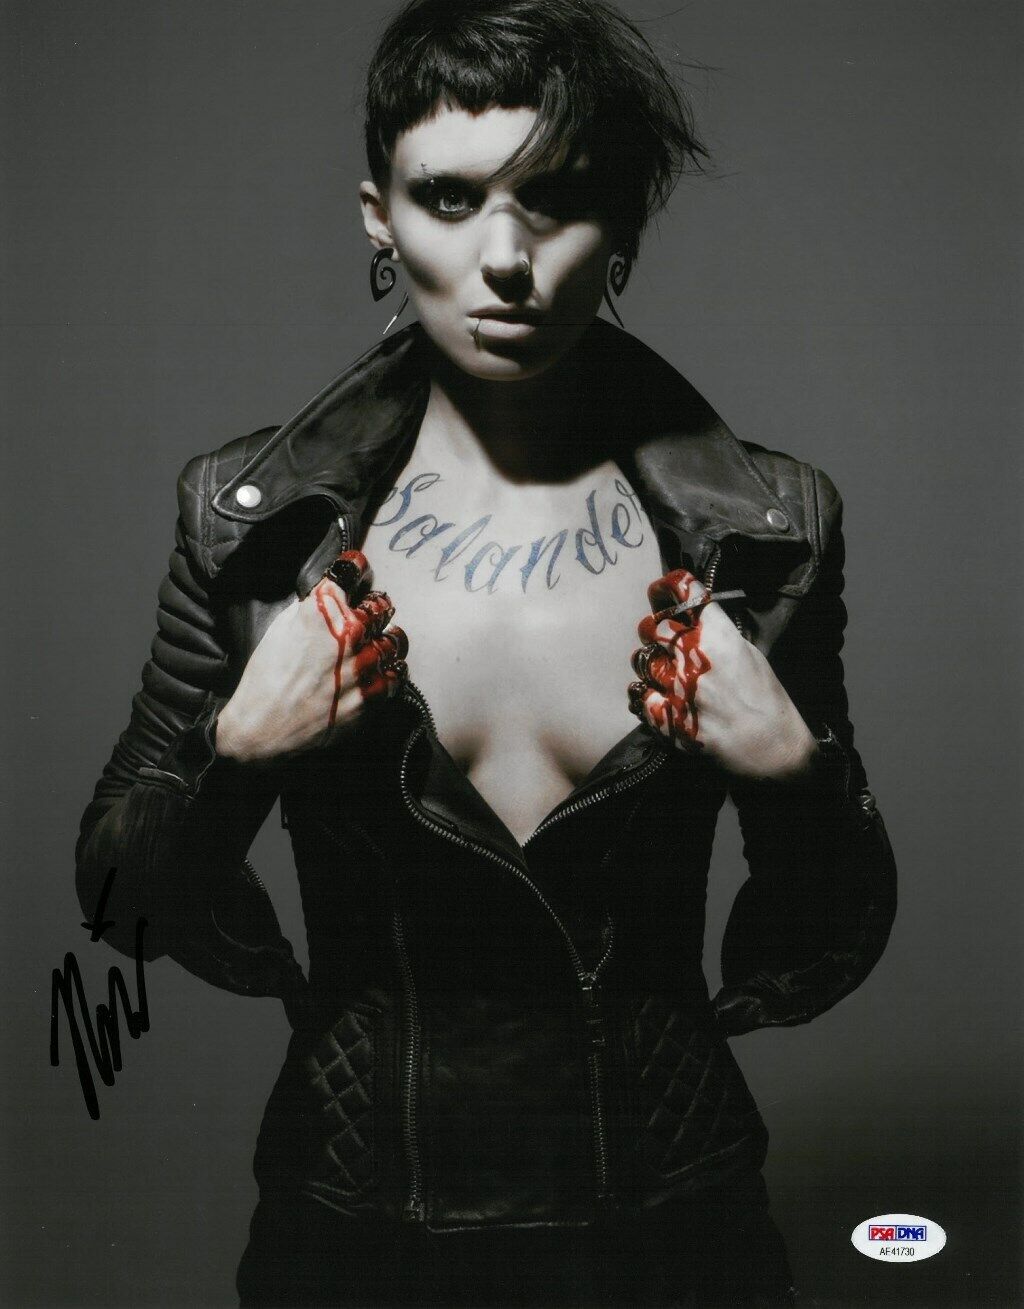 Rooney Mara Signed Girl With the Dragon Tattoo Auto 11x14 Photo Poster painting PSA/DNA #AE41730